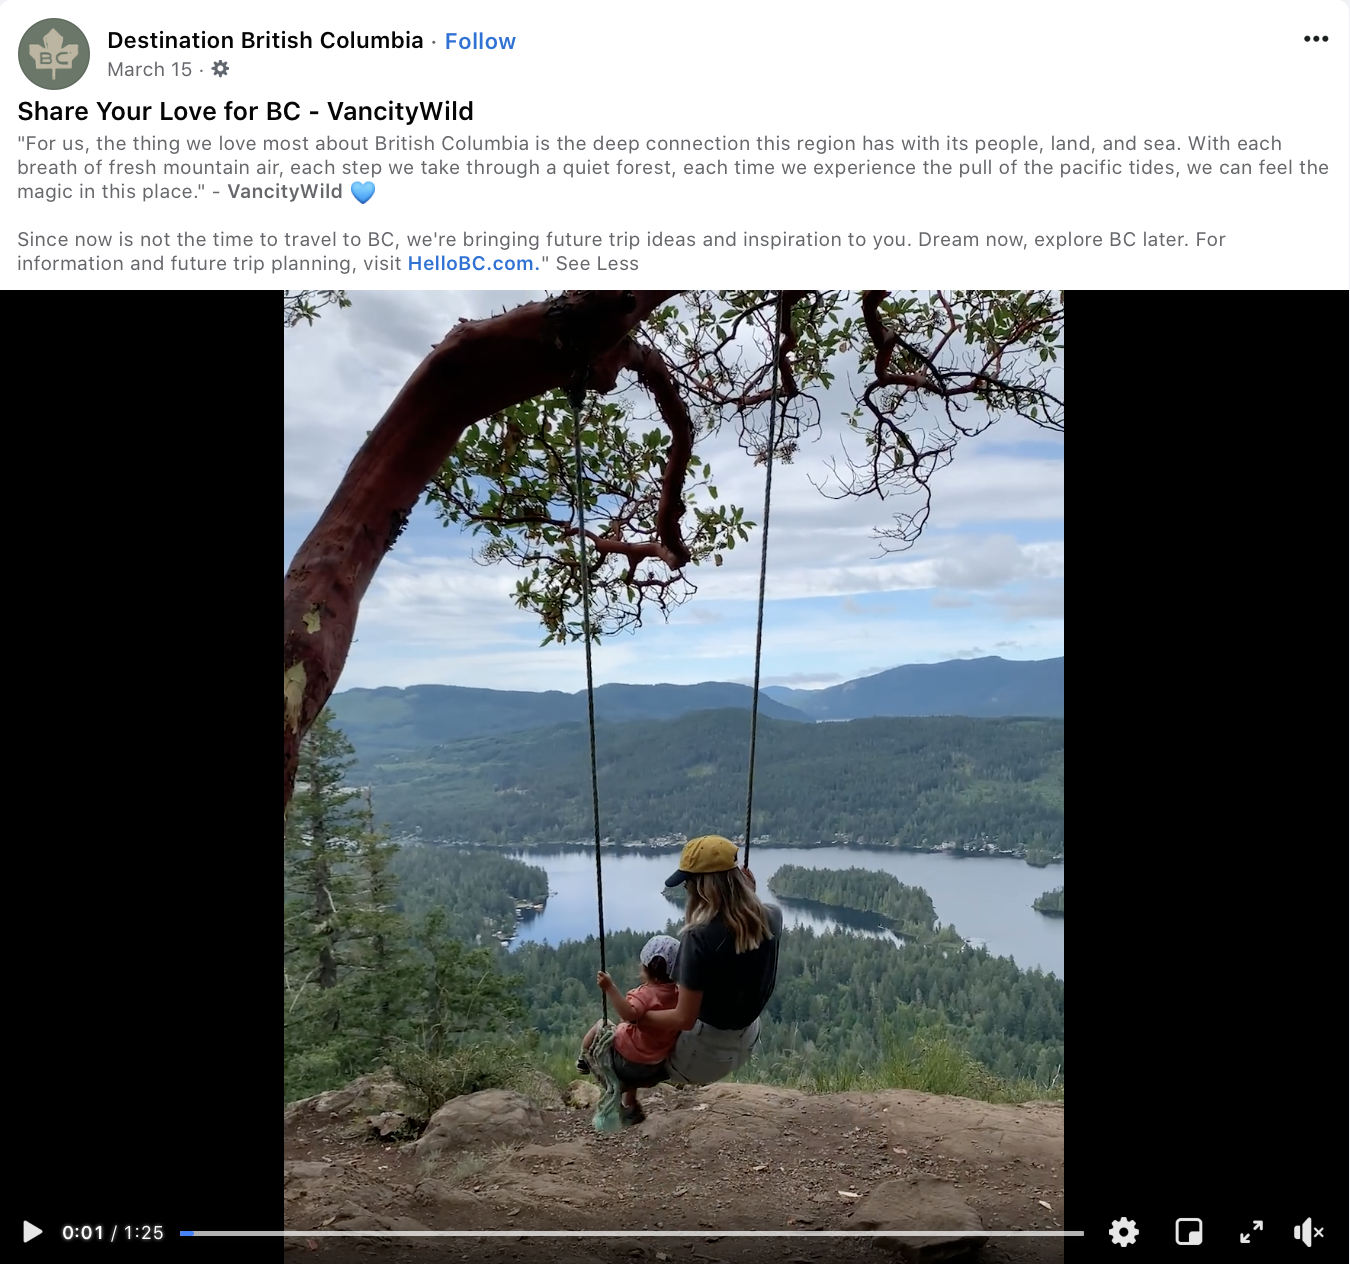 Screenshot of local Vancouver influencers (@VancityWild)'s "Share your love for BC" post featuring a video.